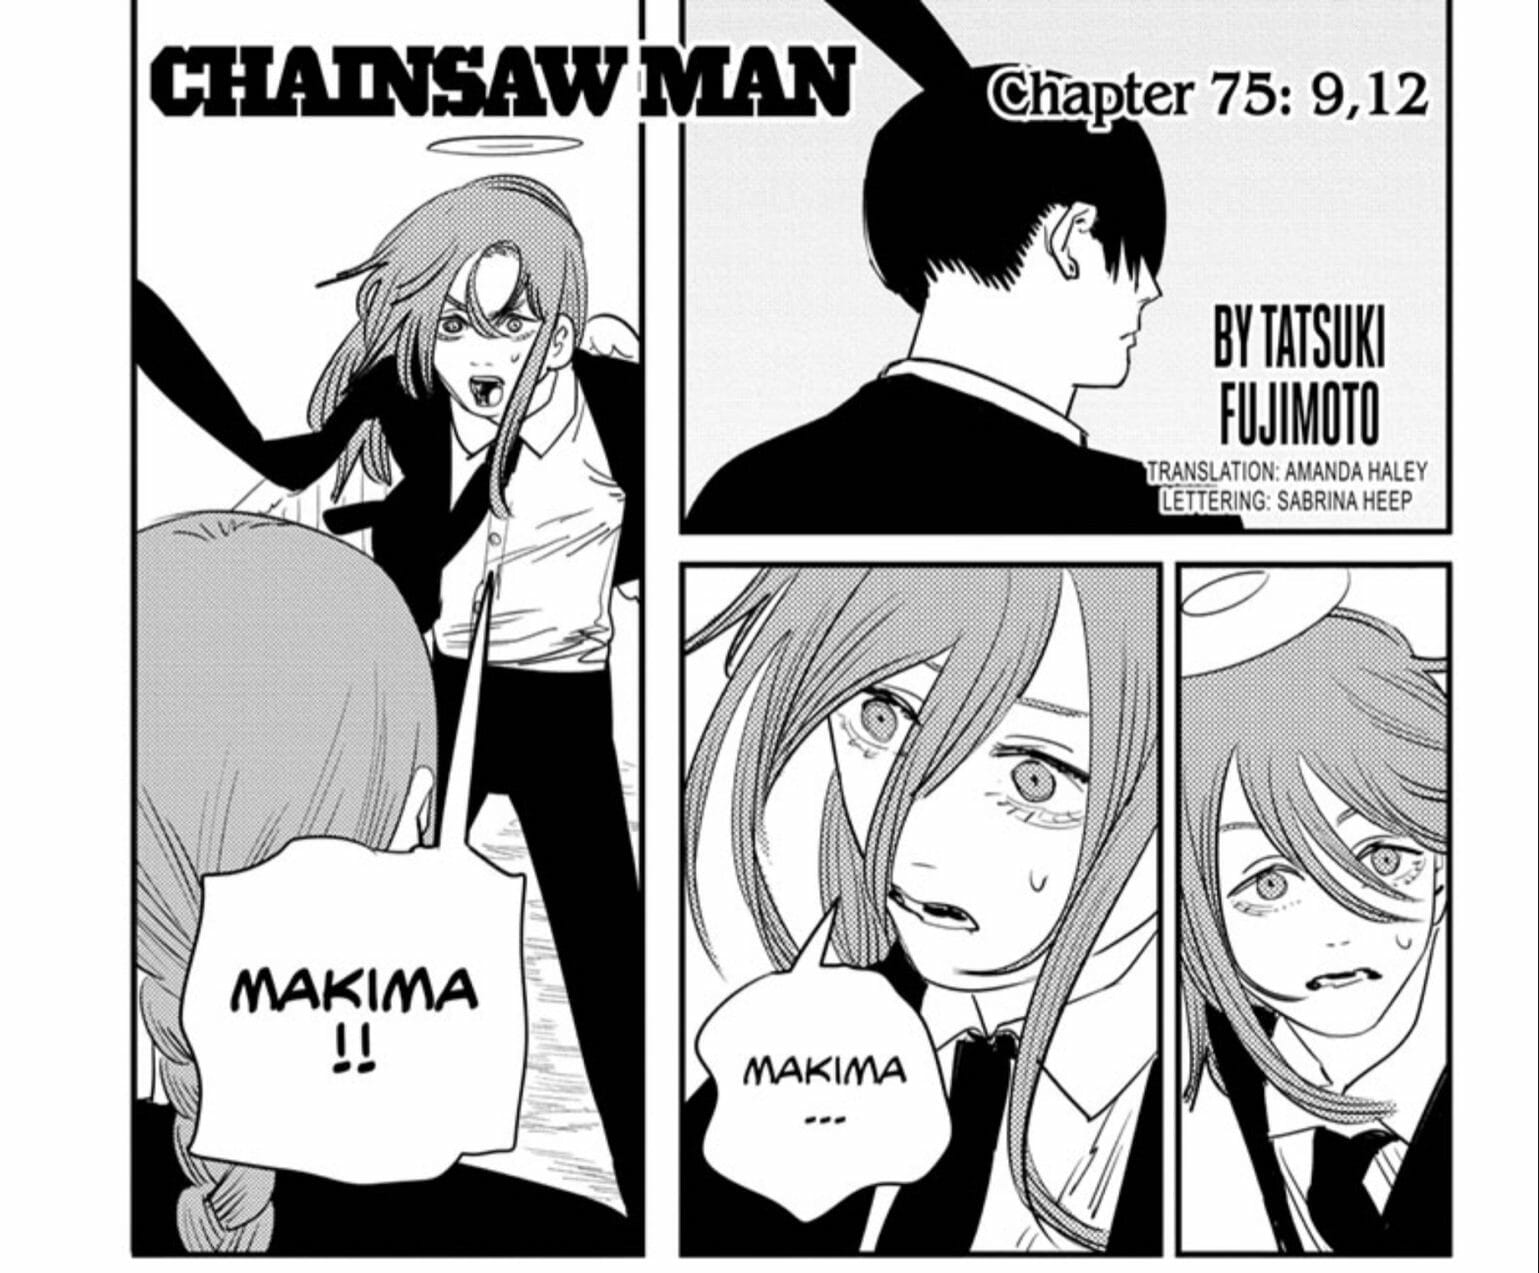 REVIEW: Chainsaw Man Episode 11 Sets Up a Chilling Finale